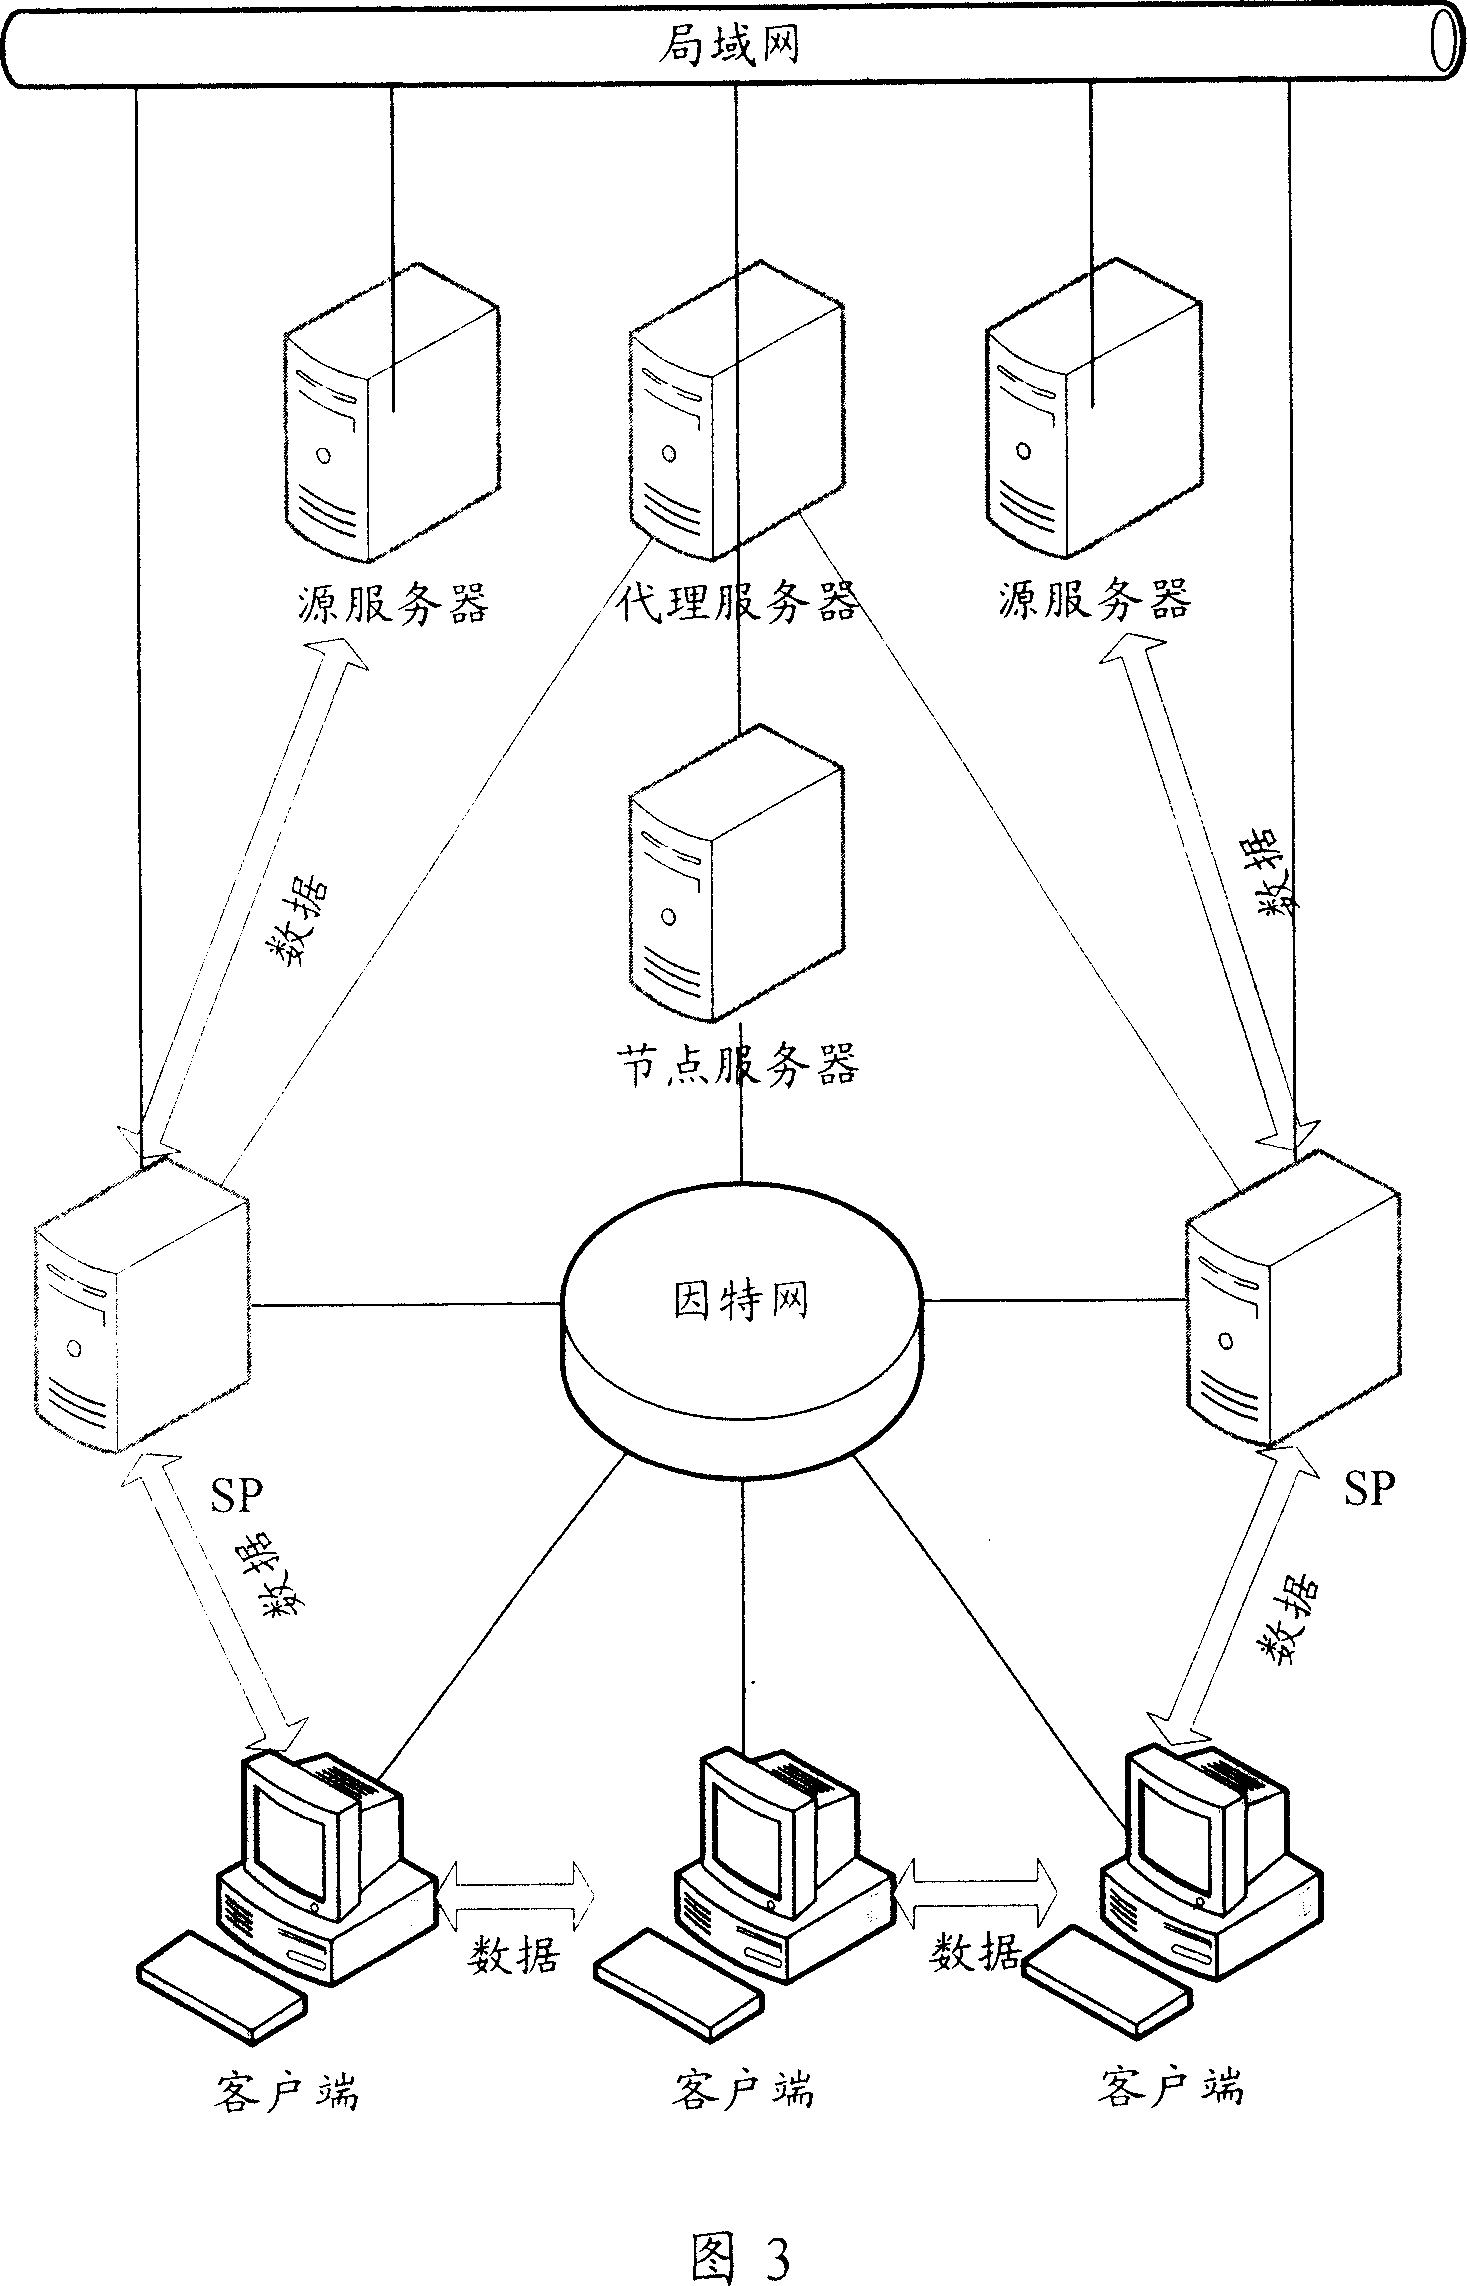 Point-to-point fluid-medium telecommunication system and method for allocating supernode resources